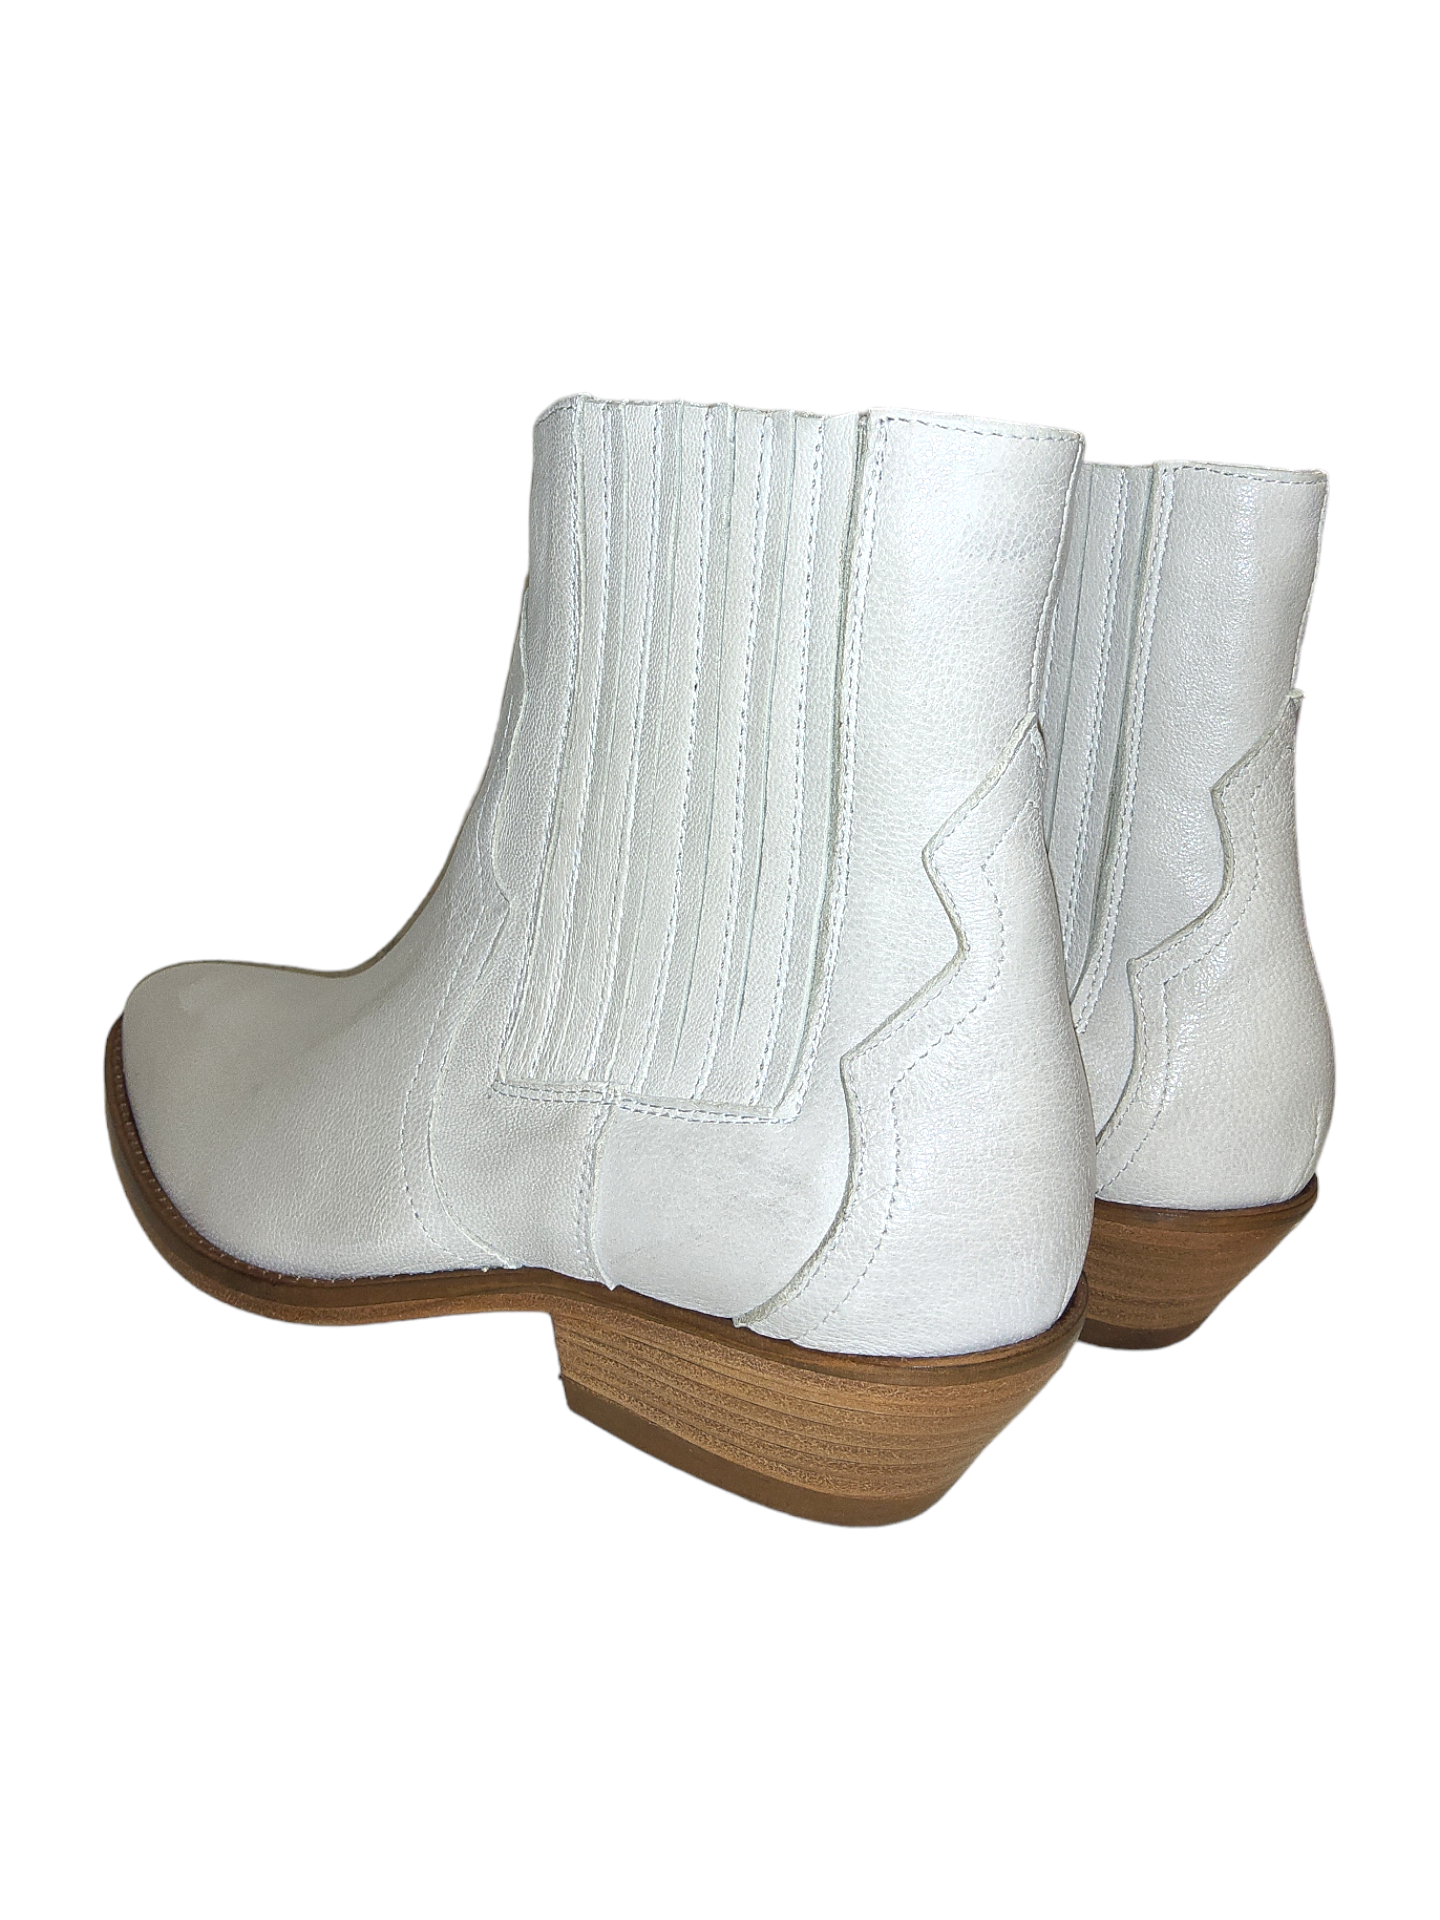 Cream leather ankle boots